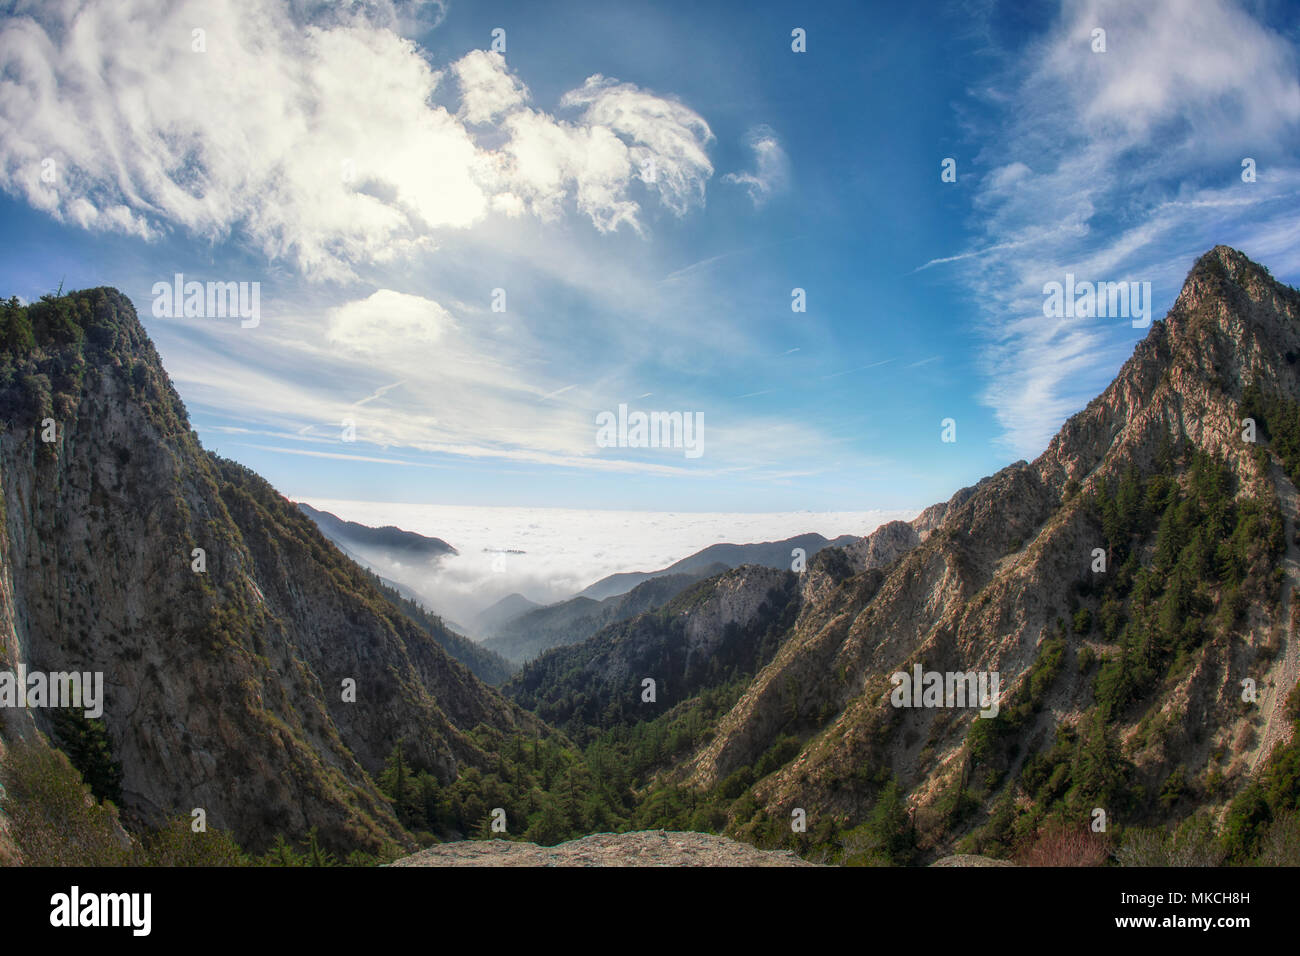 The breathtaking view of Mt. Markham and Mt. Wilson summits from Eaton Saddle Trailhead in Los Angeles National Forest Park, San Gabriel Mountains, California. Stock Photo